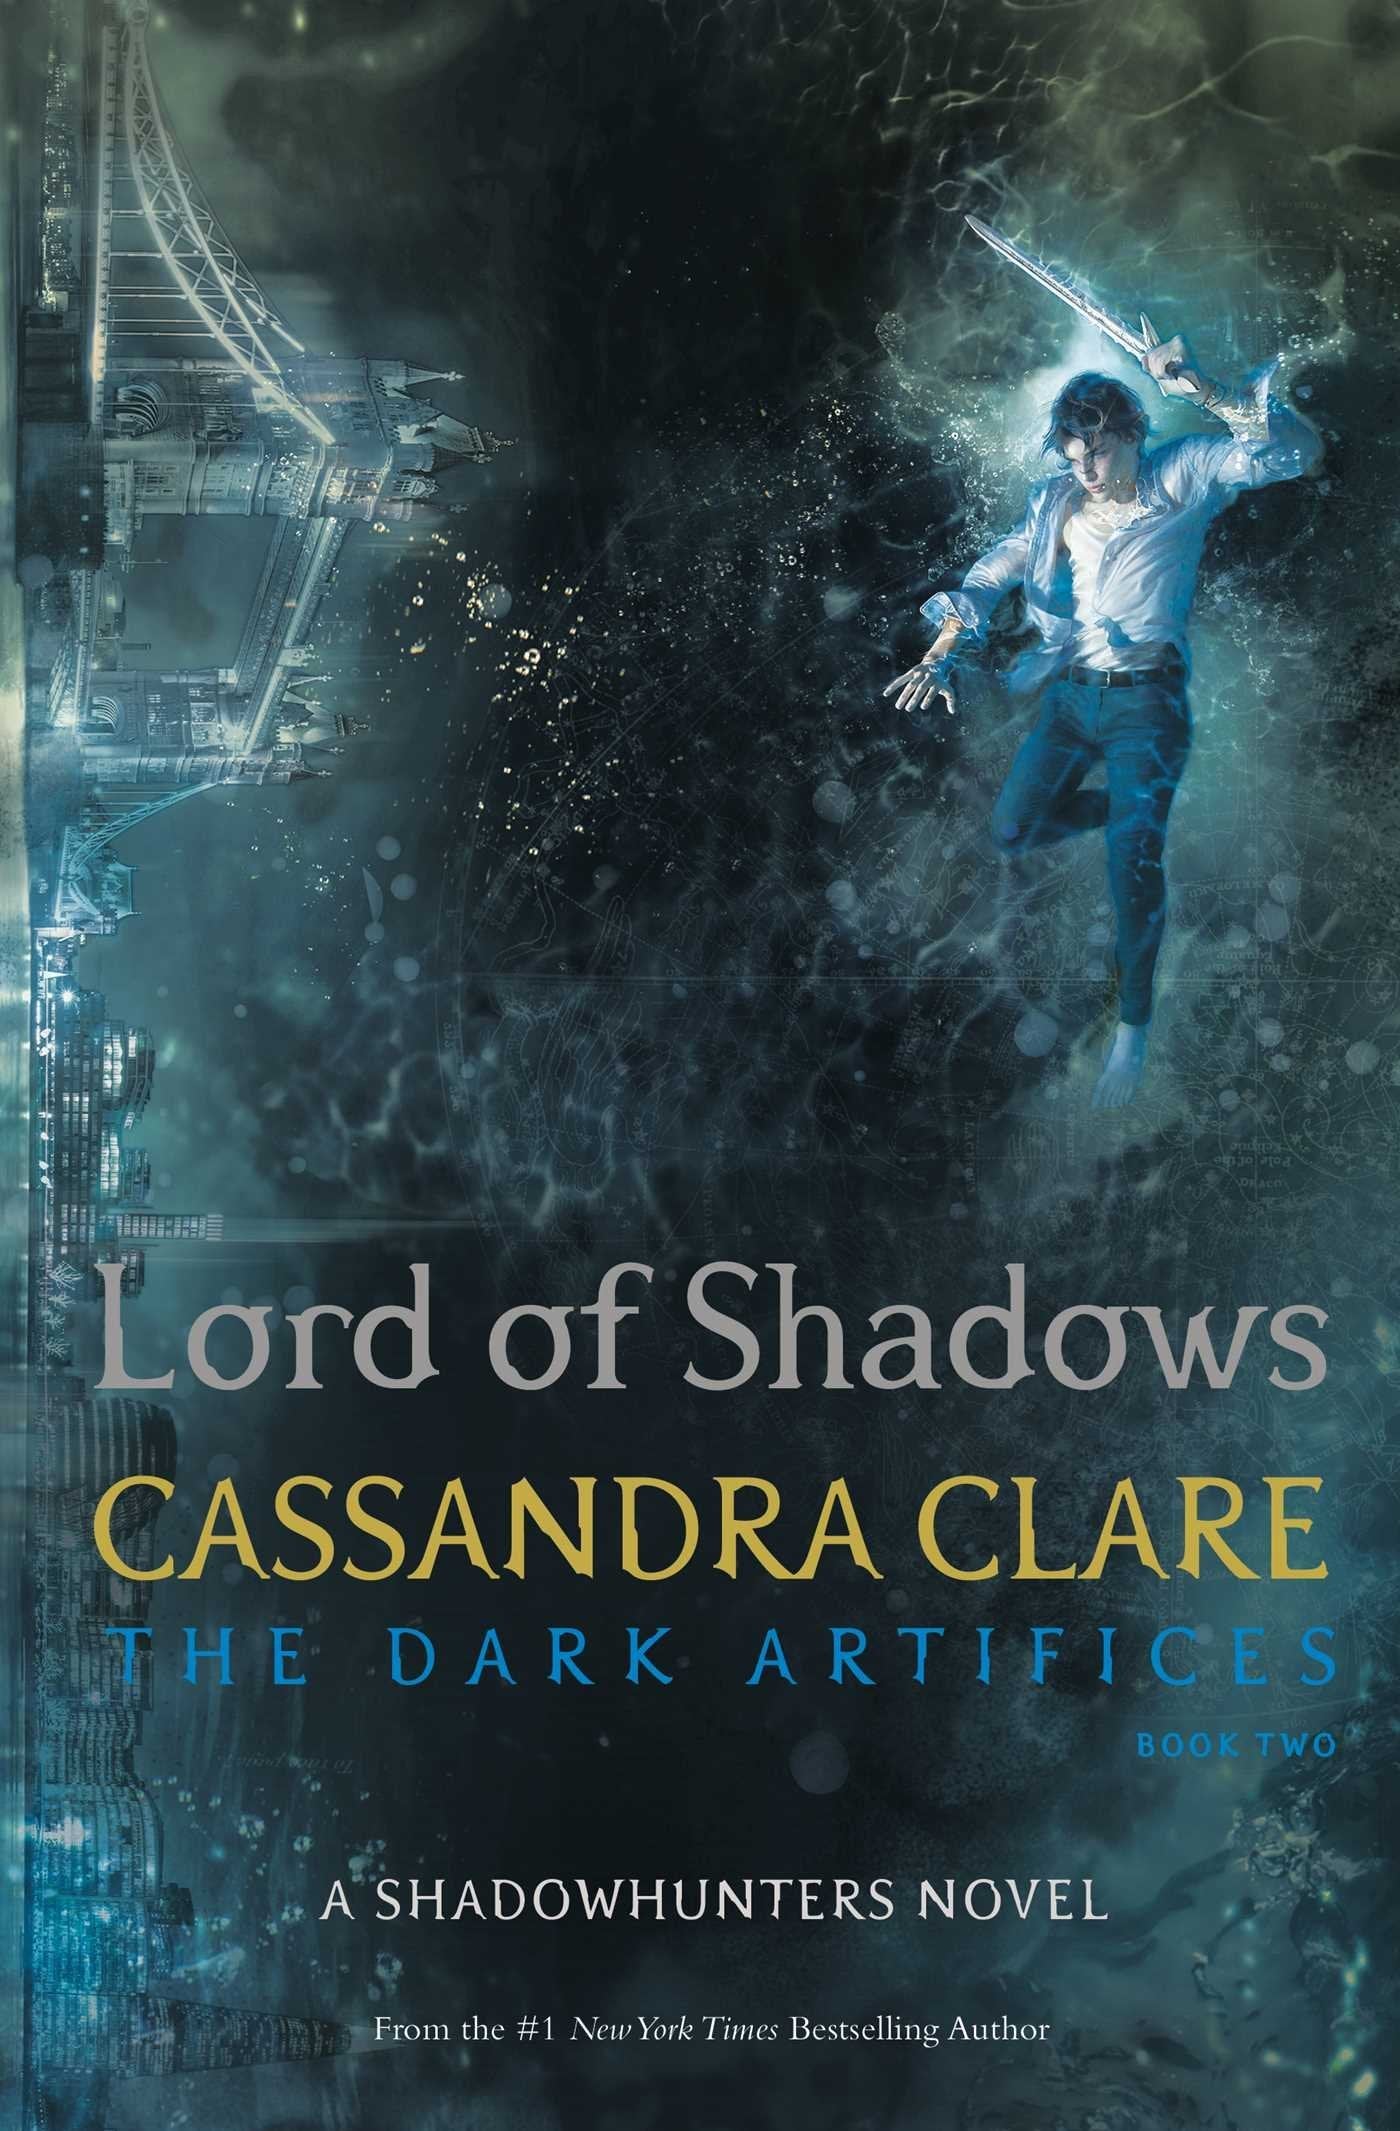 Lord of Shadows (The Dark Artifices Book 2) by Cassandra Clare (Original Paperback)